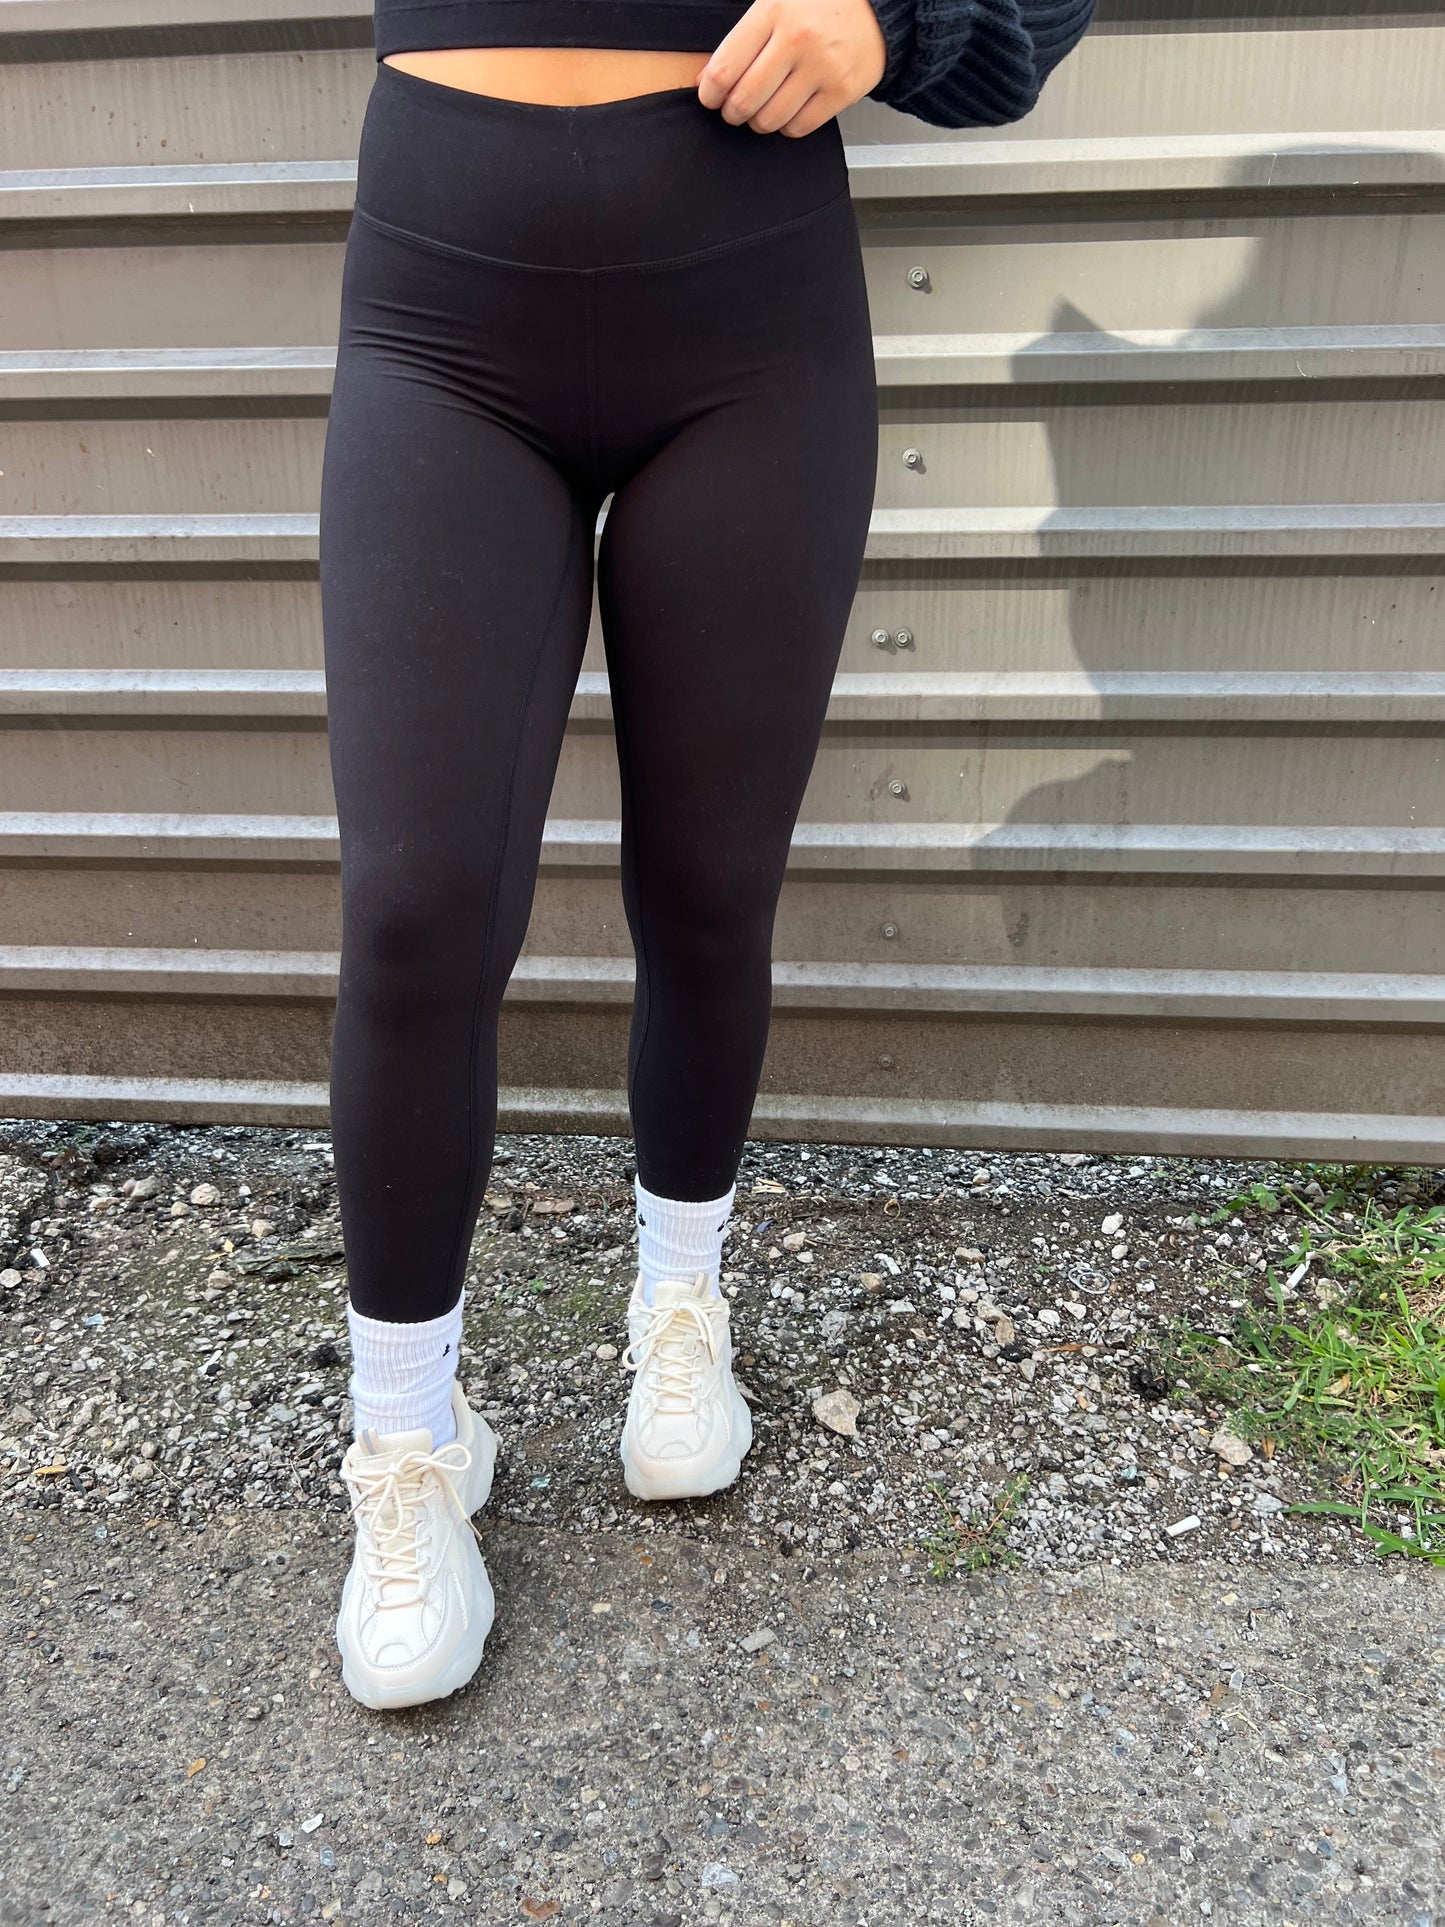 GOING STRONG BLACK WORK OUT LEGGINGS - THE HIP EAGLE BOUTIQUE